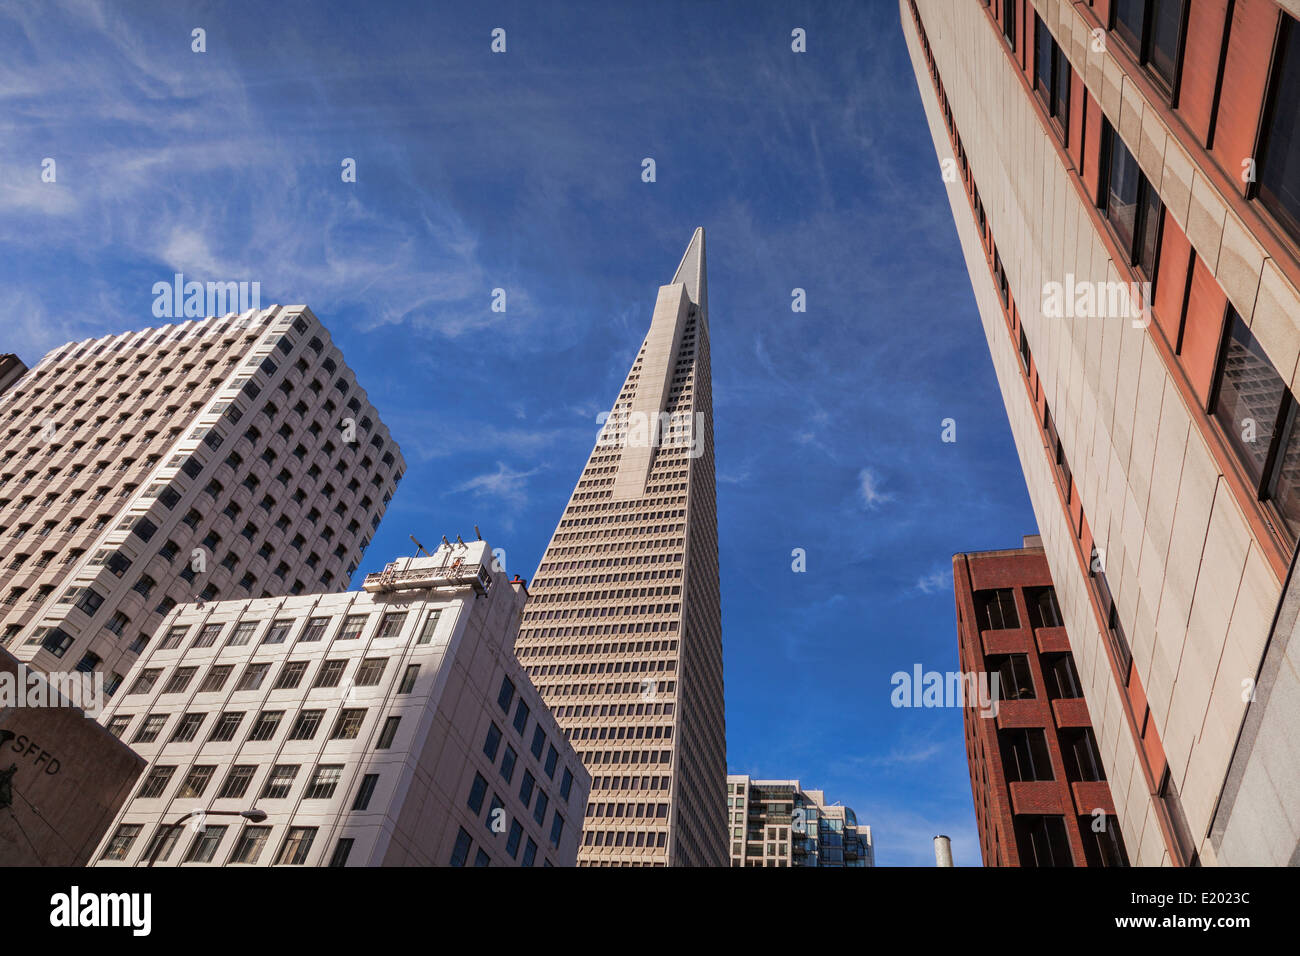 Transamerica building, San Francisco, designed by William Pereira, it is the tallest building in San Francisco and... Stock Photo